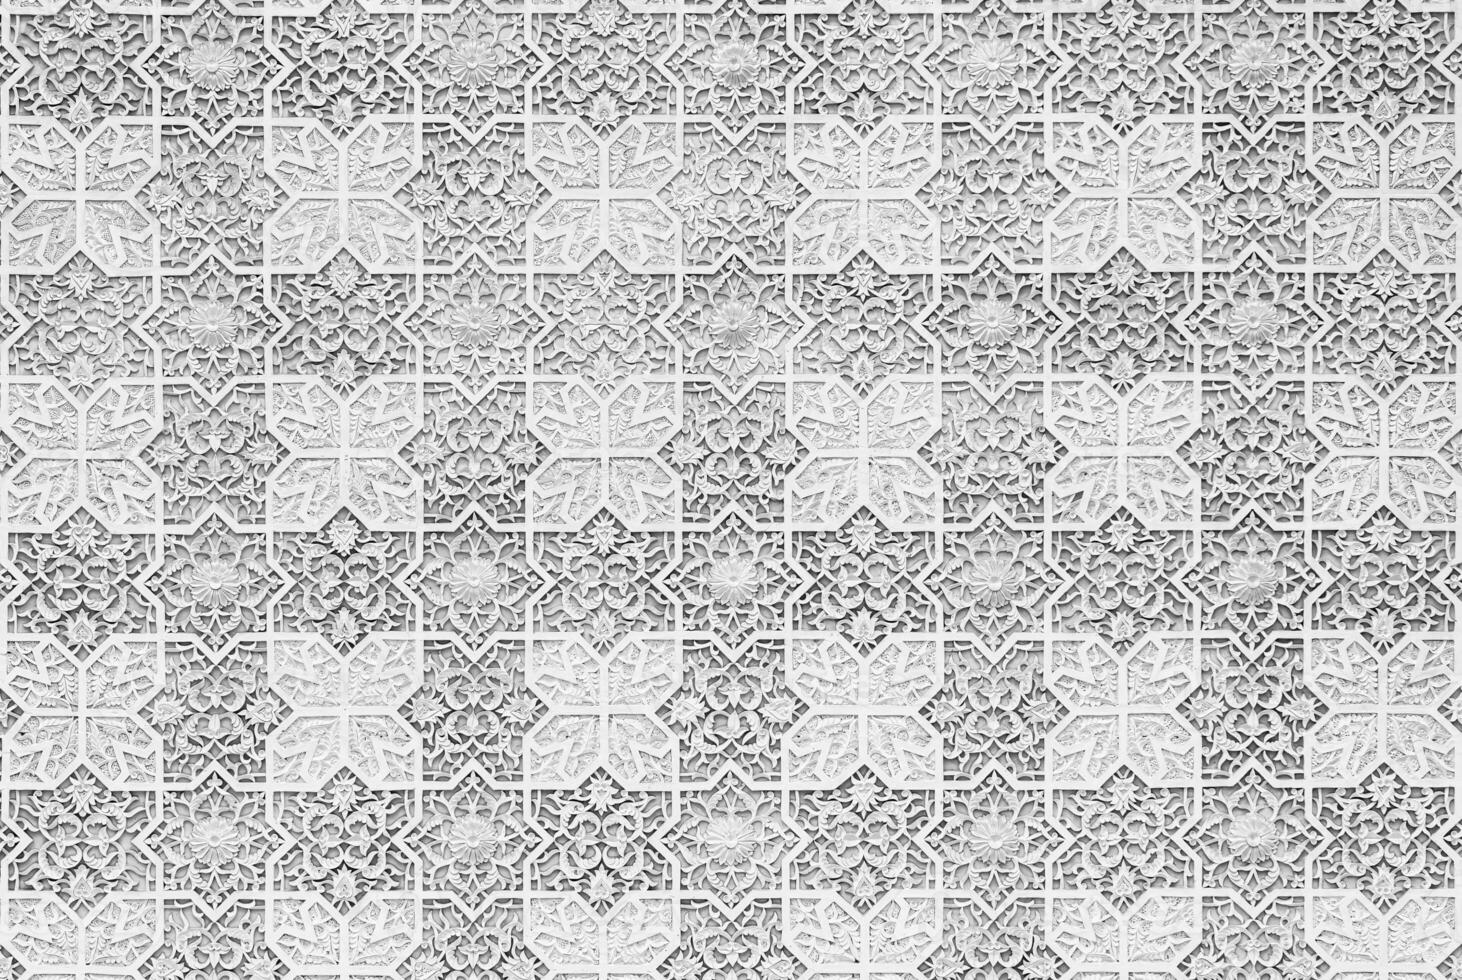 Geometric traditional Islamic ornament. Fragment of a pattern mosaic.Abstract background. photo